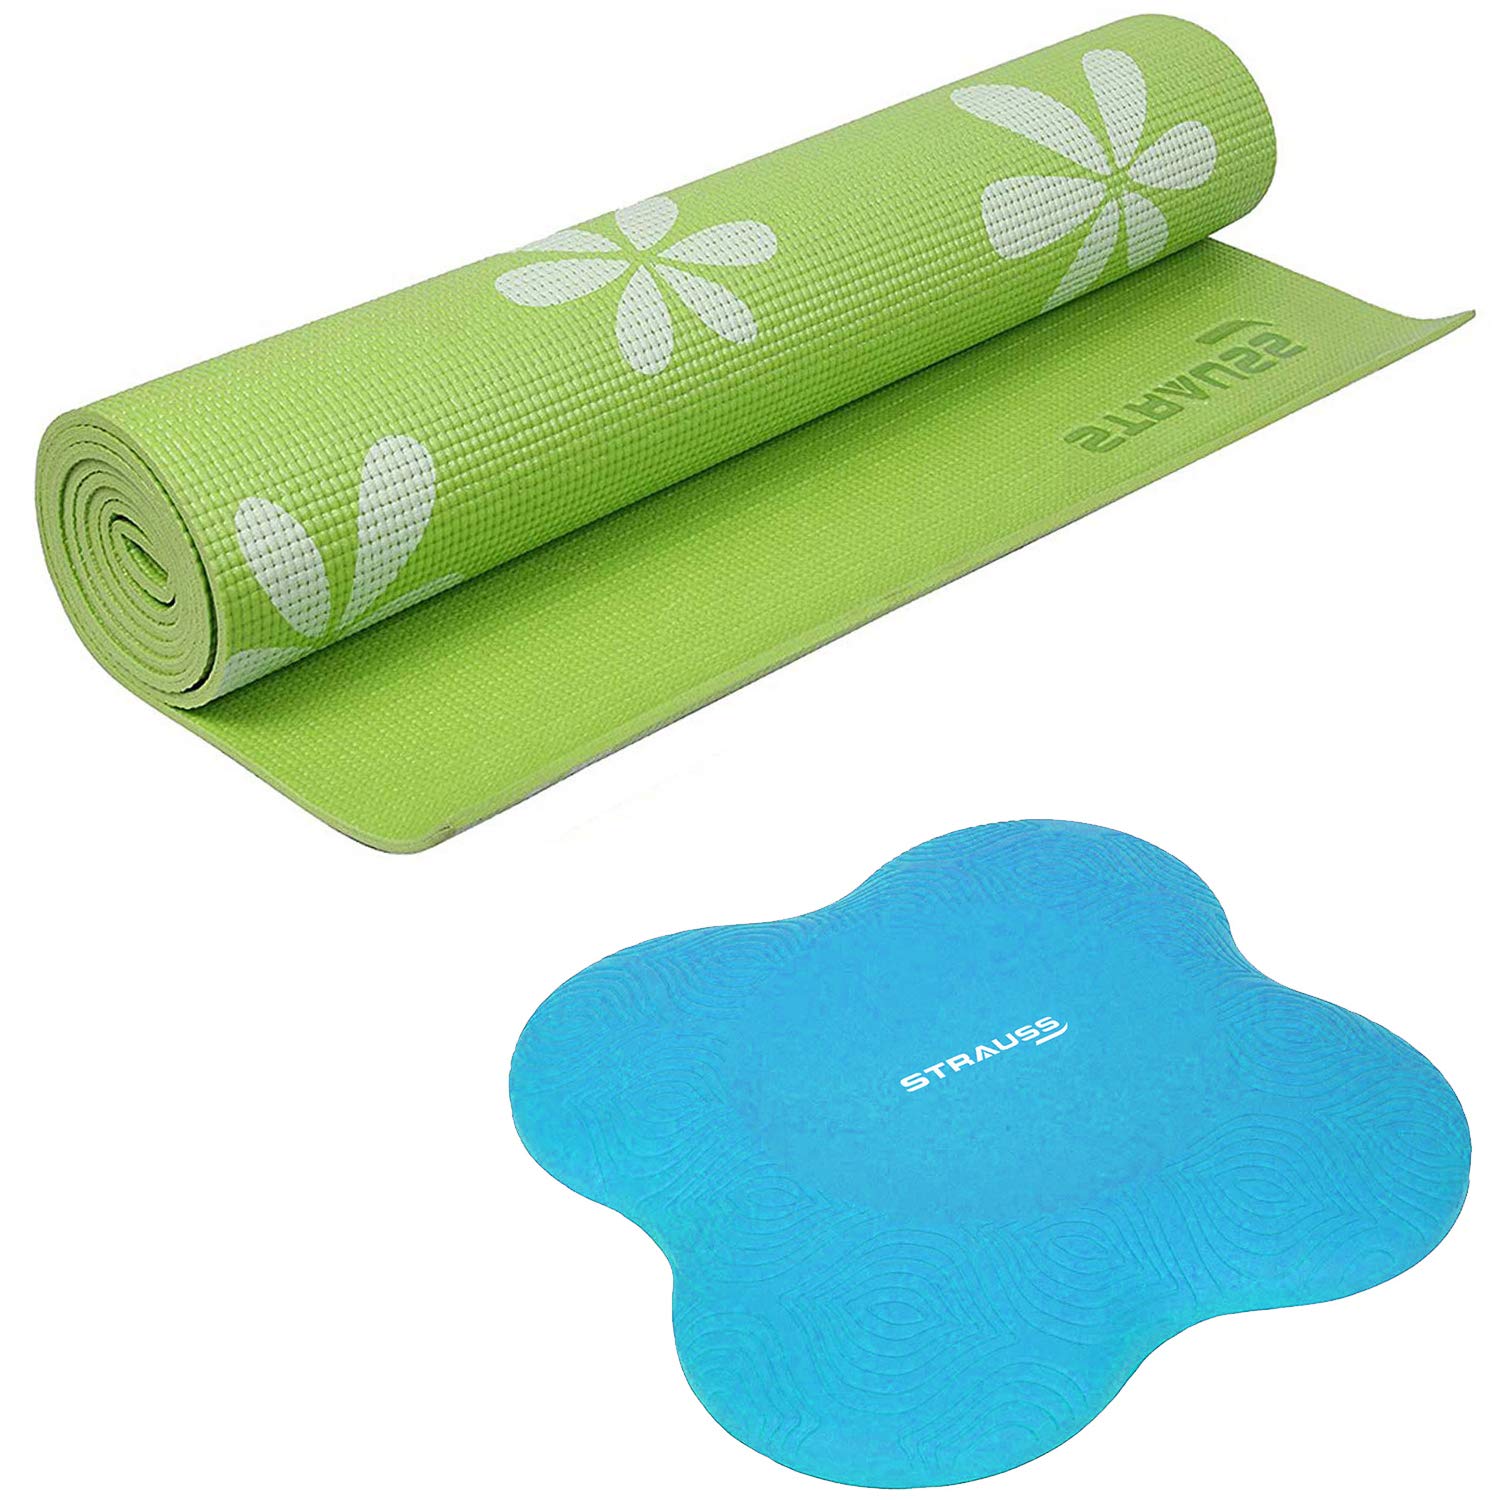 Tesler Strauss Yoga Mat 6MM (Floral Green) and Yoga Knee Pad Cushions, (Blue)